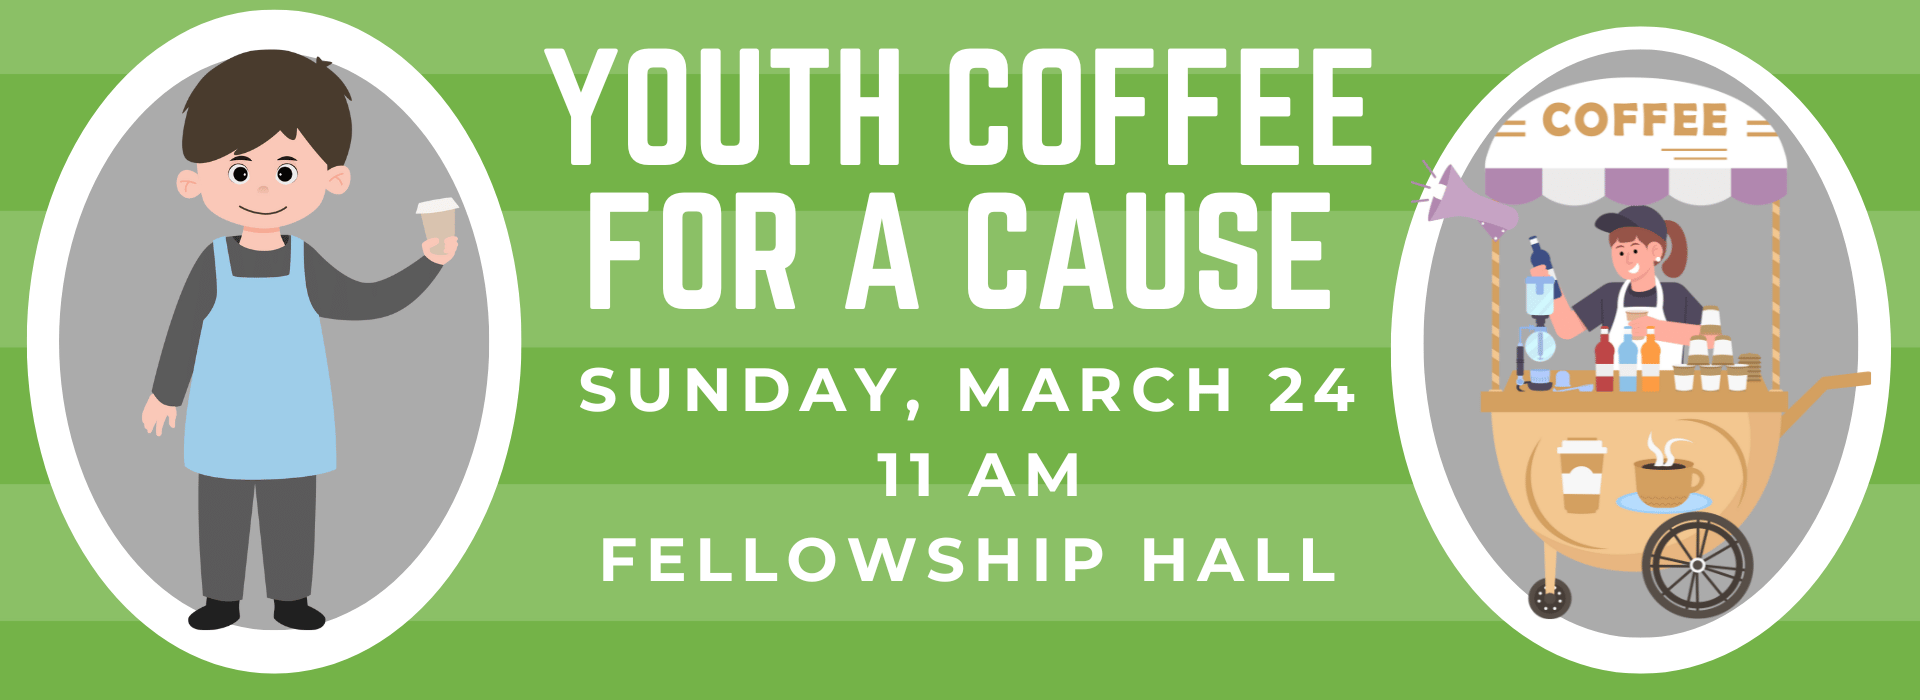 Special Youth Coffee for a Cause